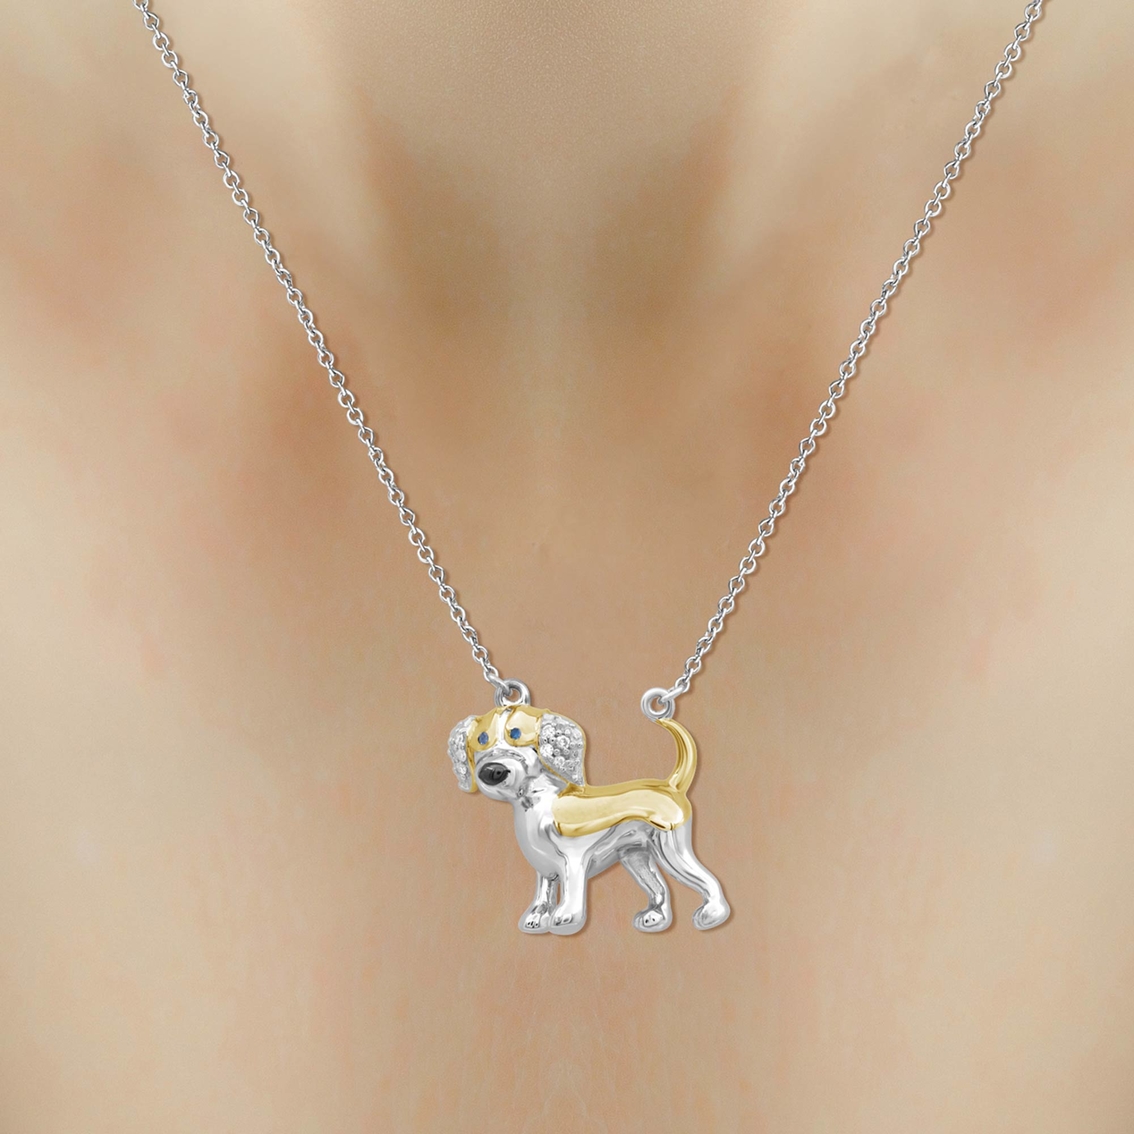 Animal's Rock Sterling 14K Plated Diamond Accent Beagle Dog Necklace 18 in. - Image 3 of 4